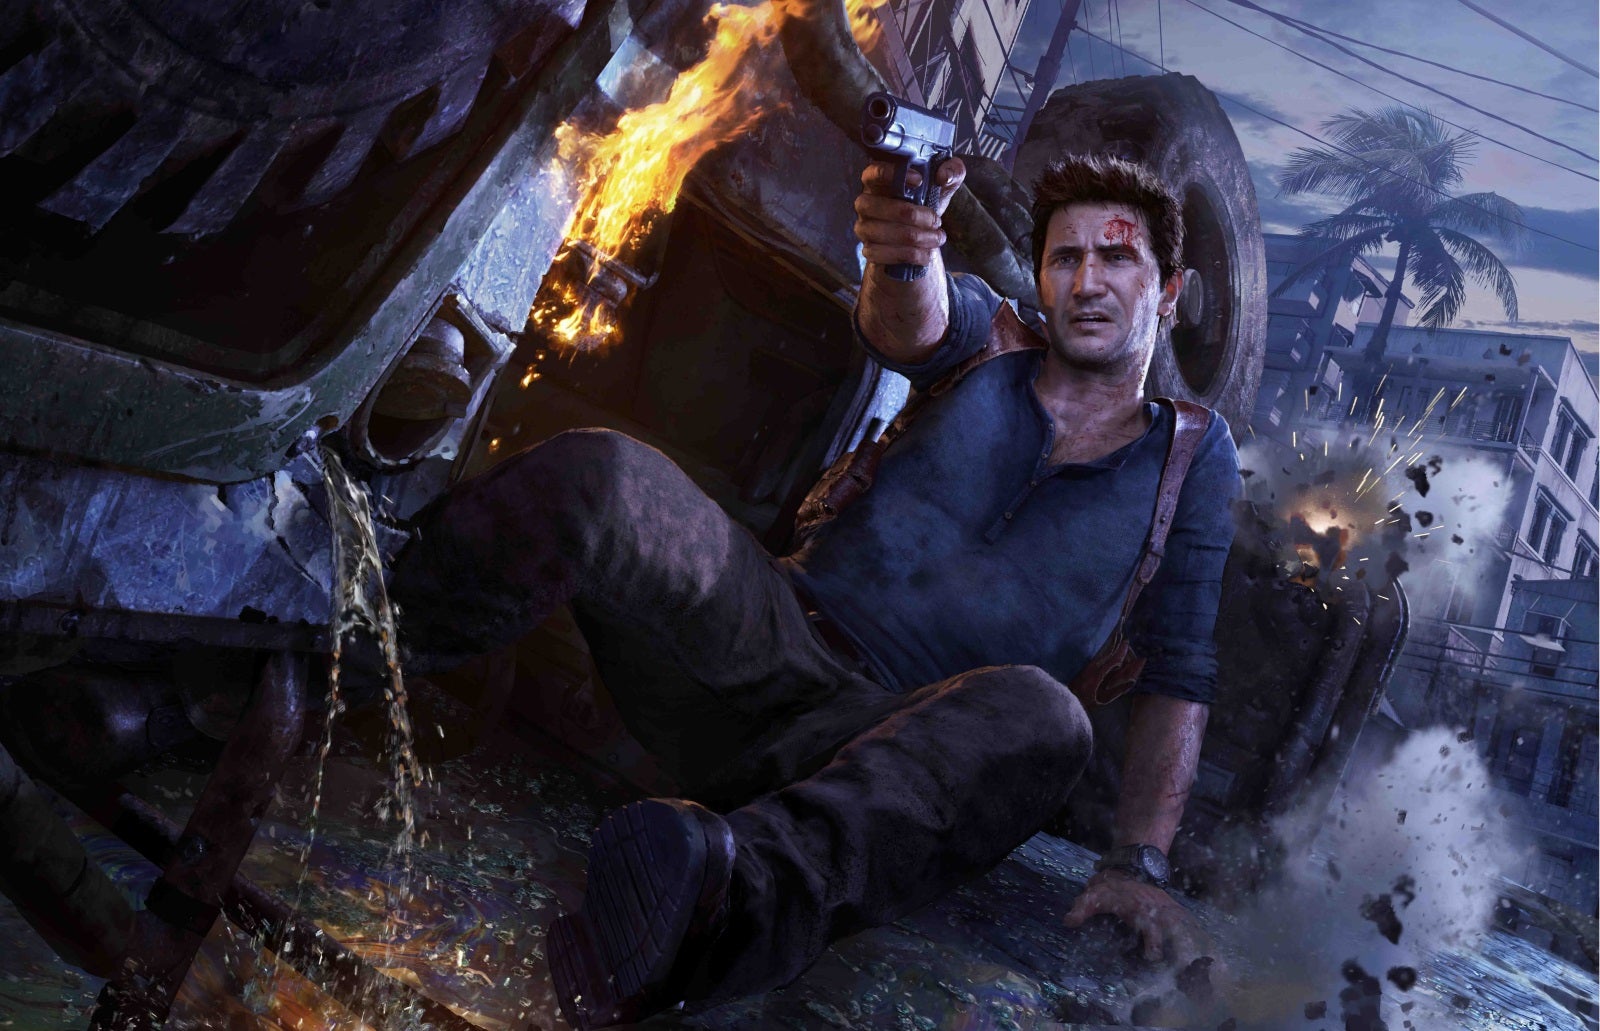 Image for Uncharted celebrates its tenth birthday with free PS4 themes, Uncharted 4 discounts, and an upcoming panel